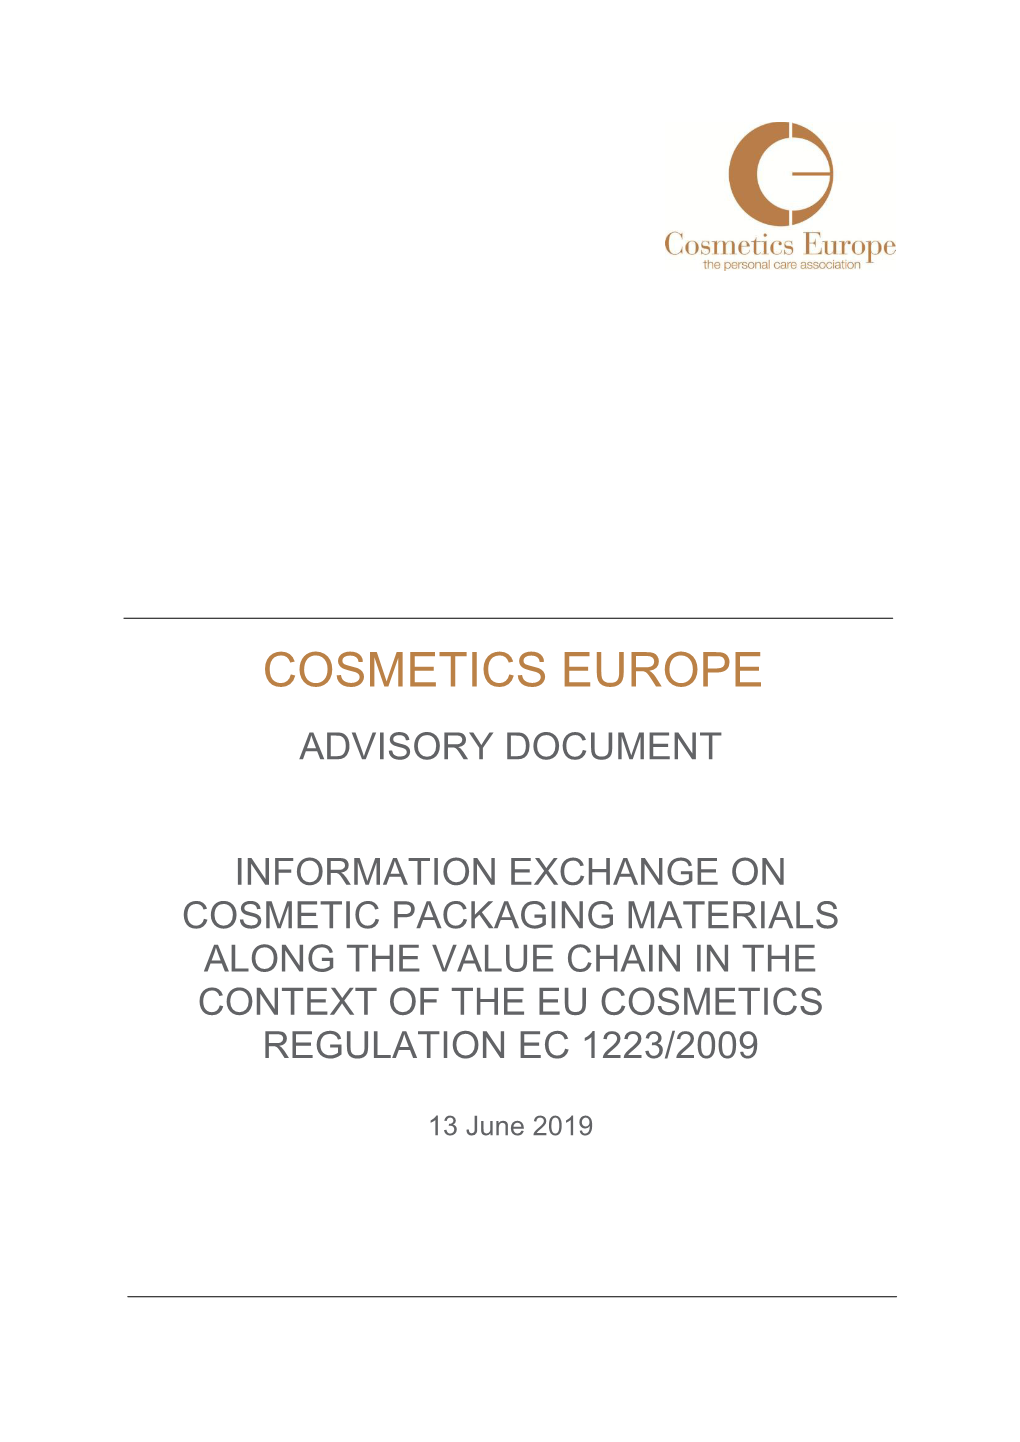 General Approach for Cosmetic Packaging